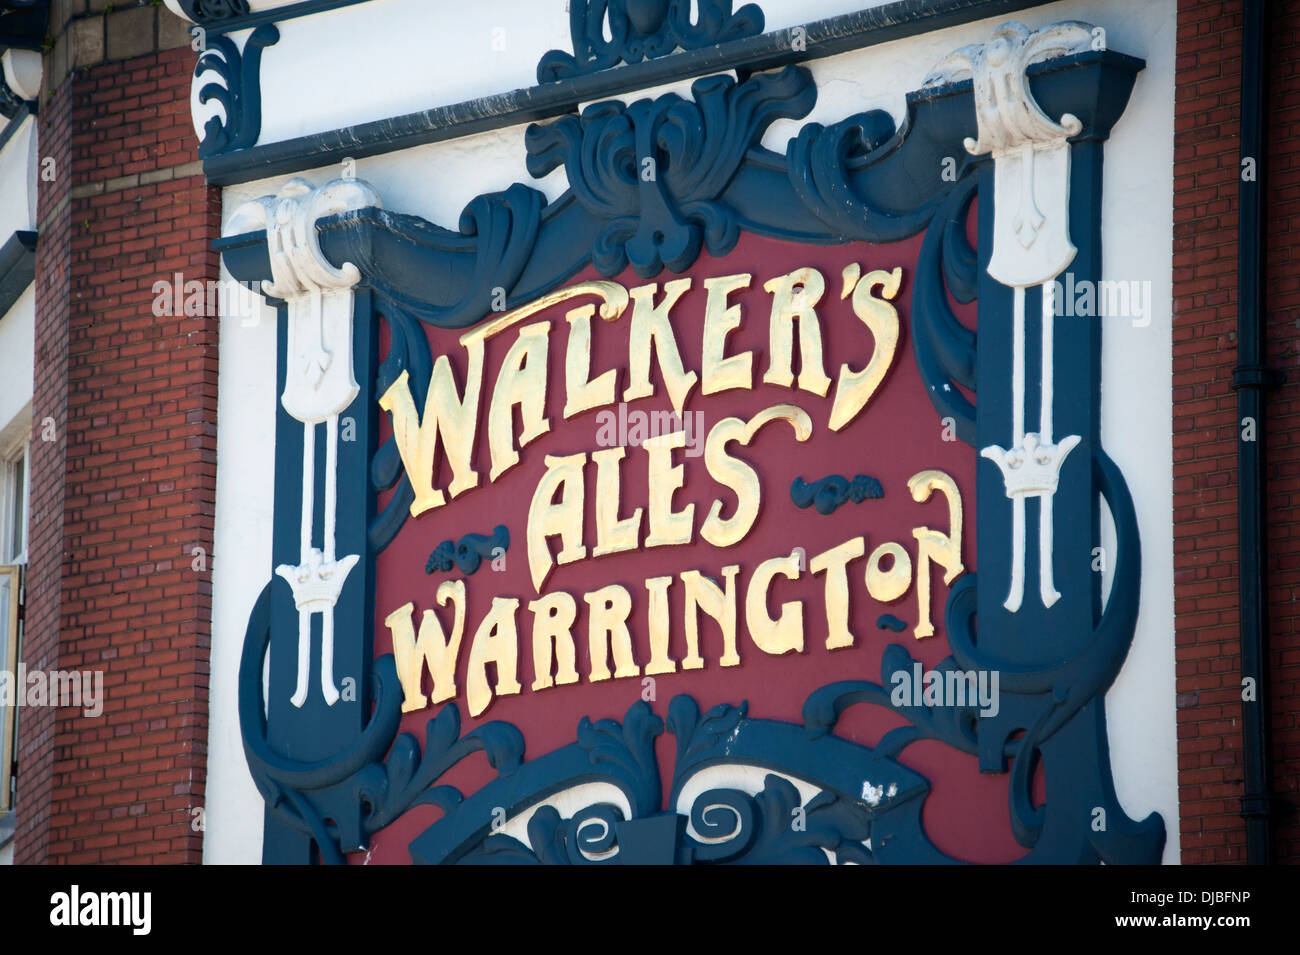 Walkers Ales Warrington Old Gold Pub Sign Stock Photo